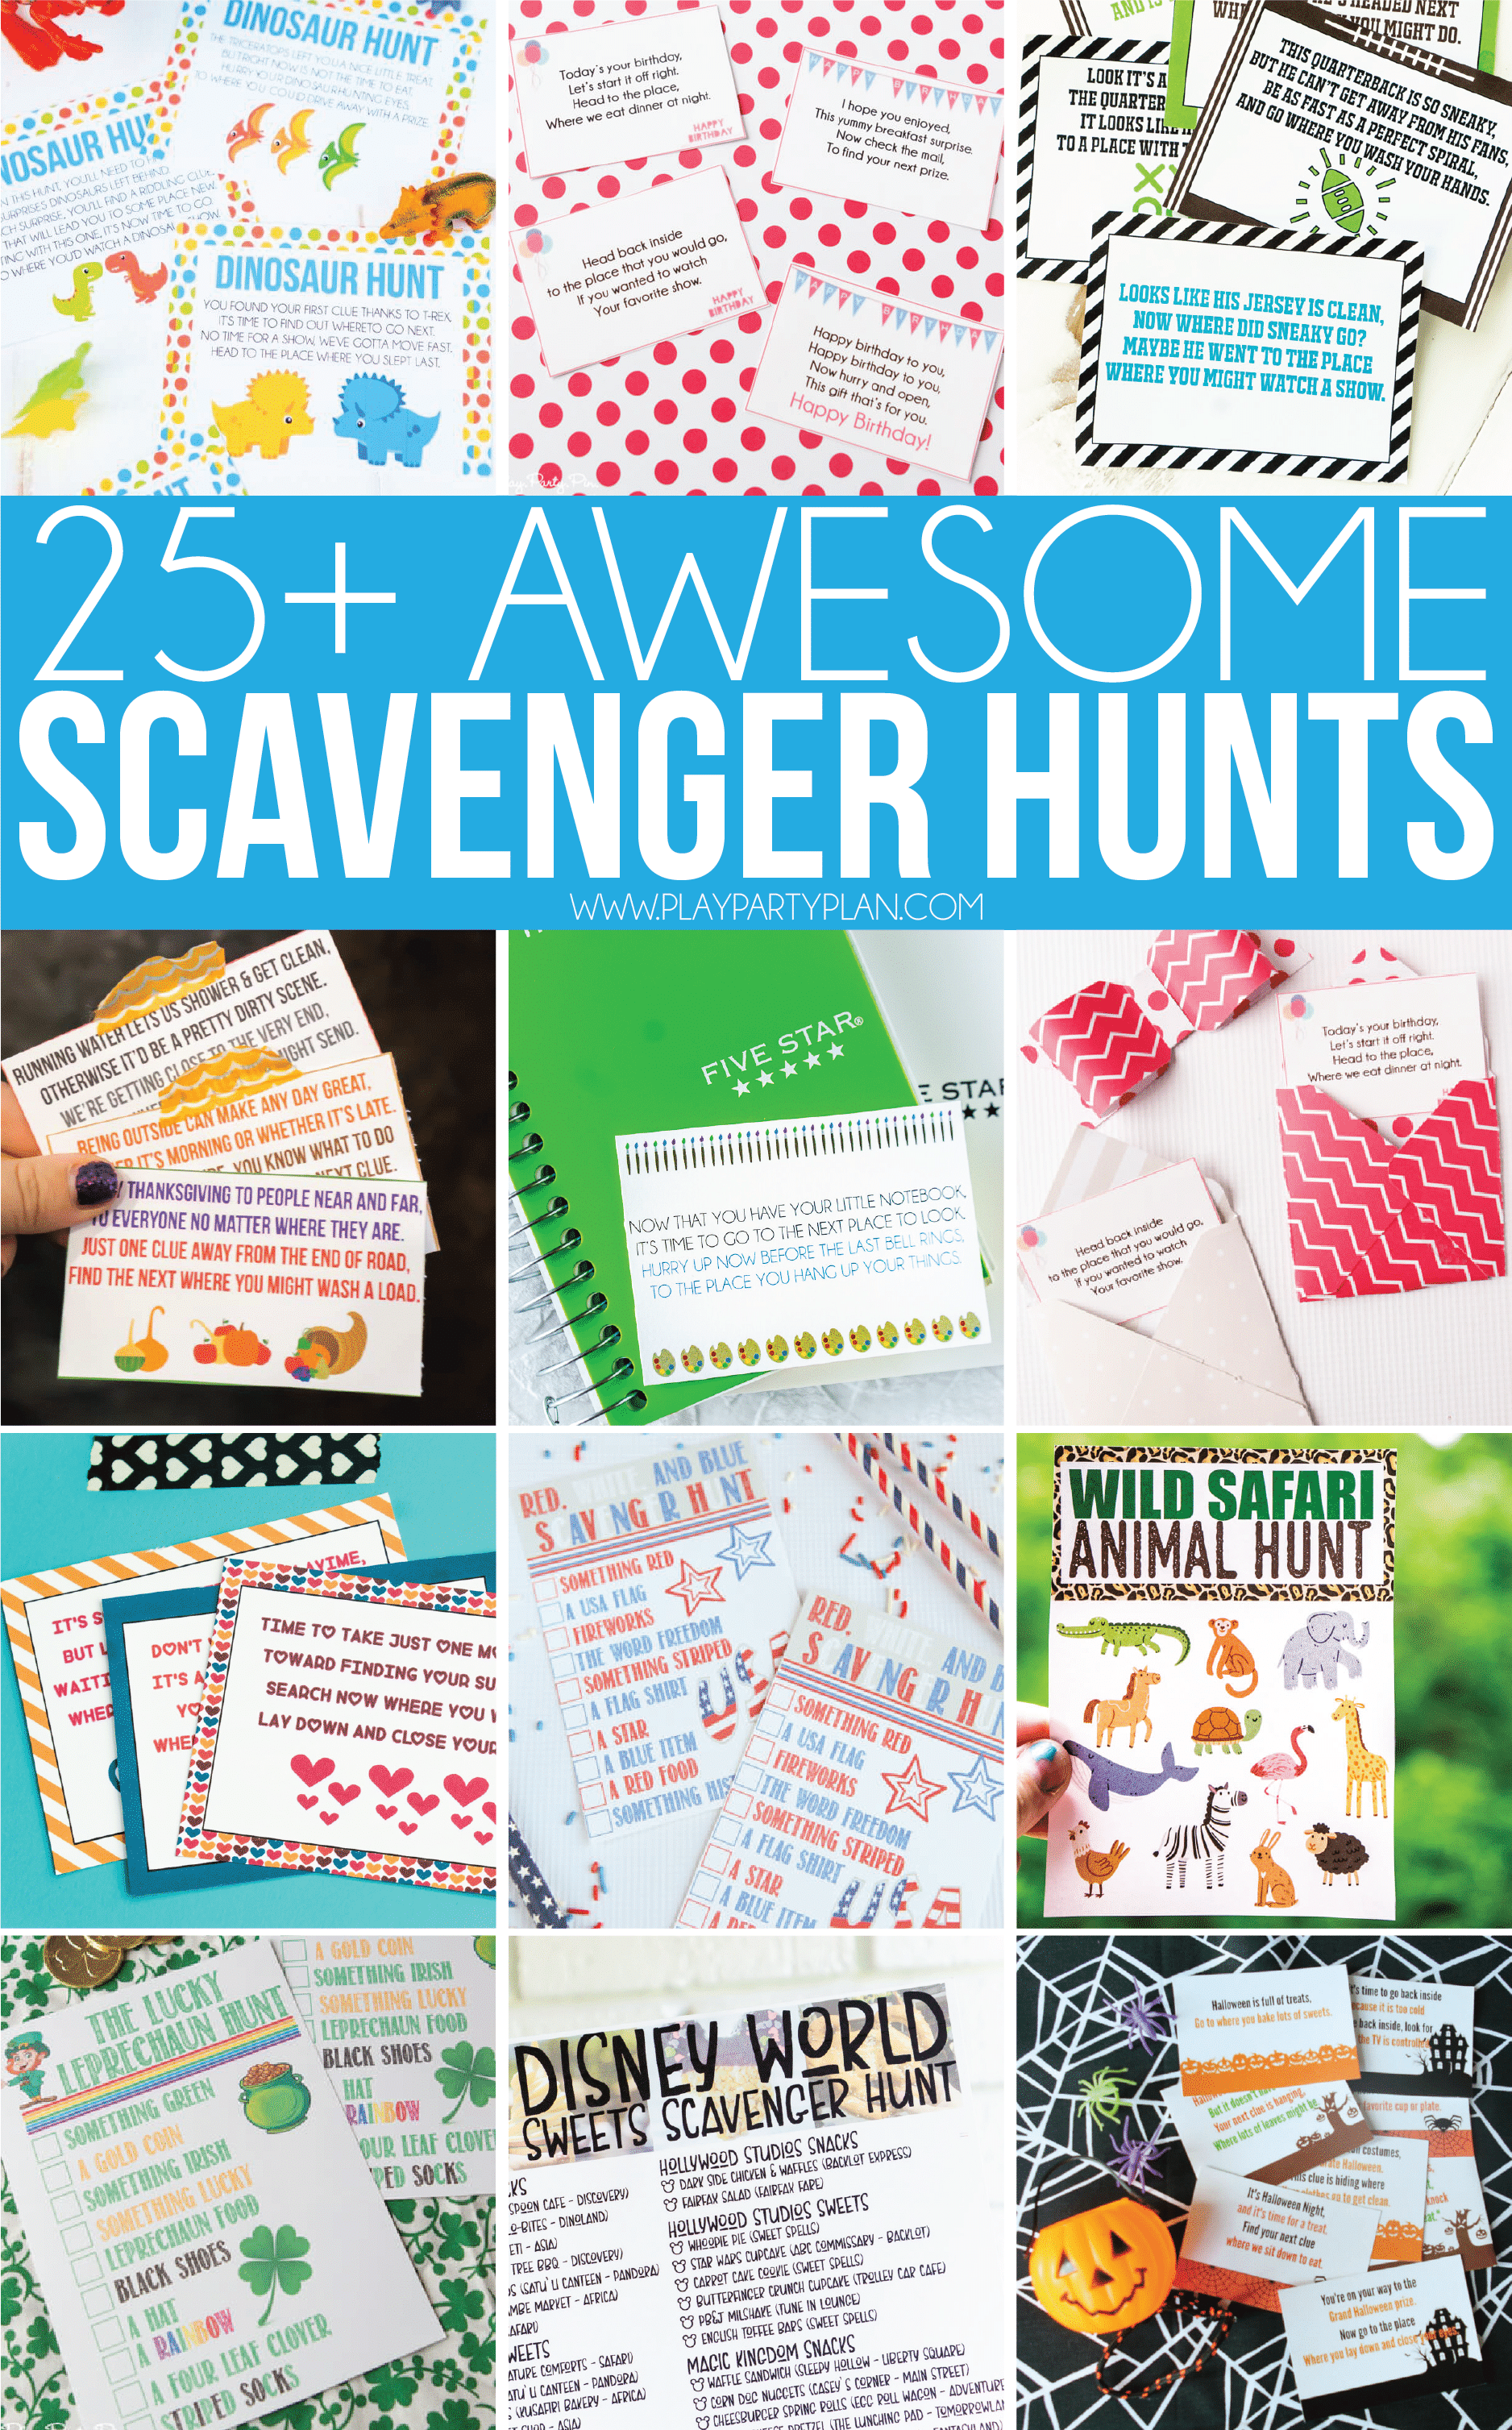 how-to-do-a-scavenger-hunt-for-christmas-gifts-scavenger-ideas-2019